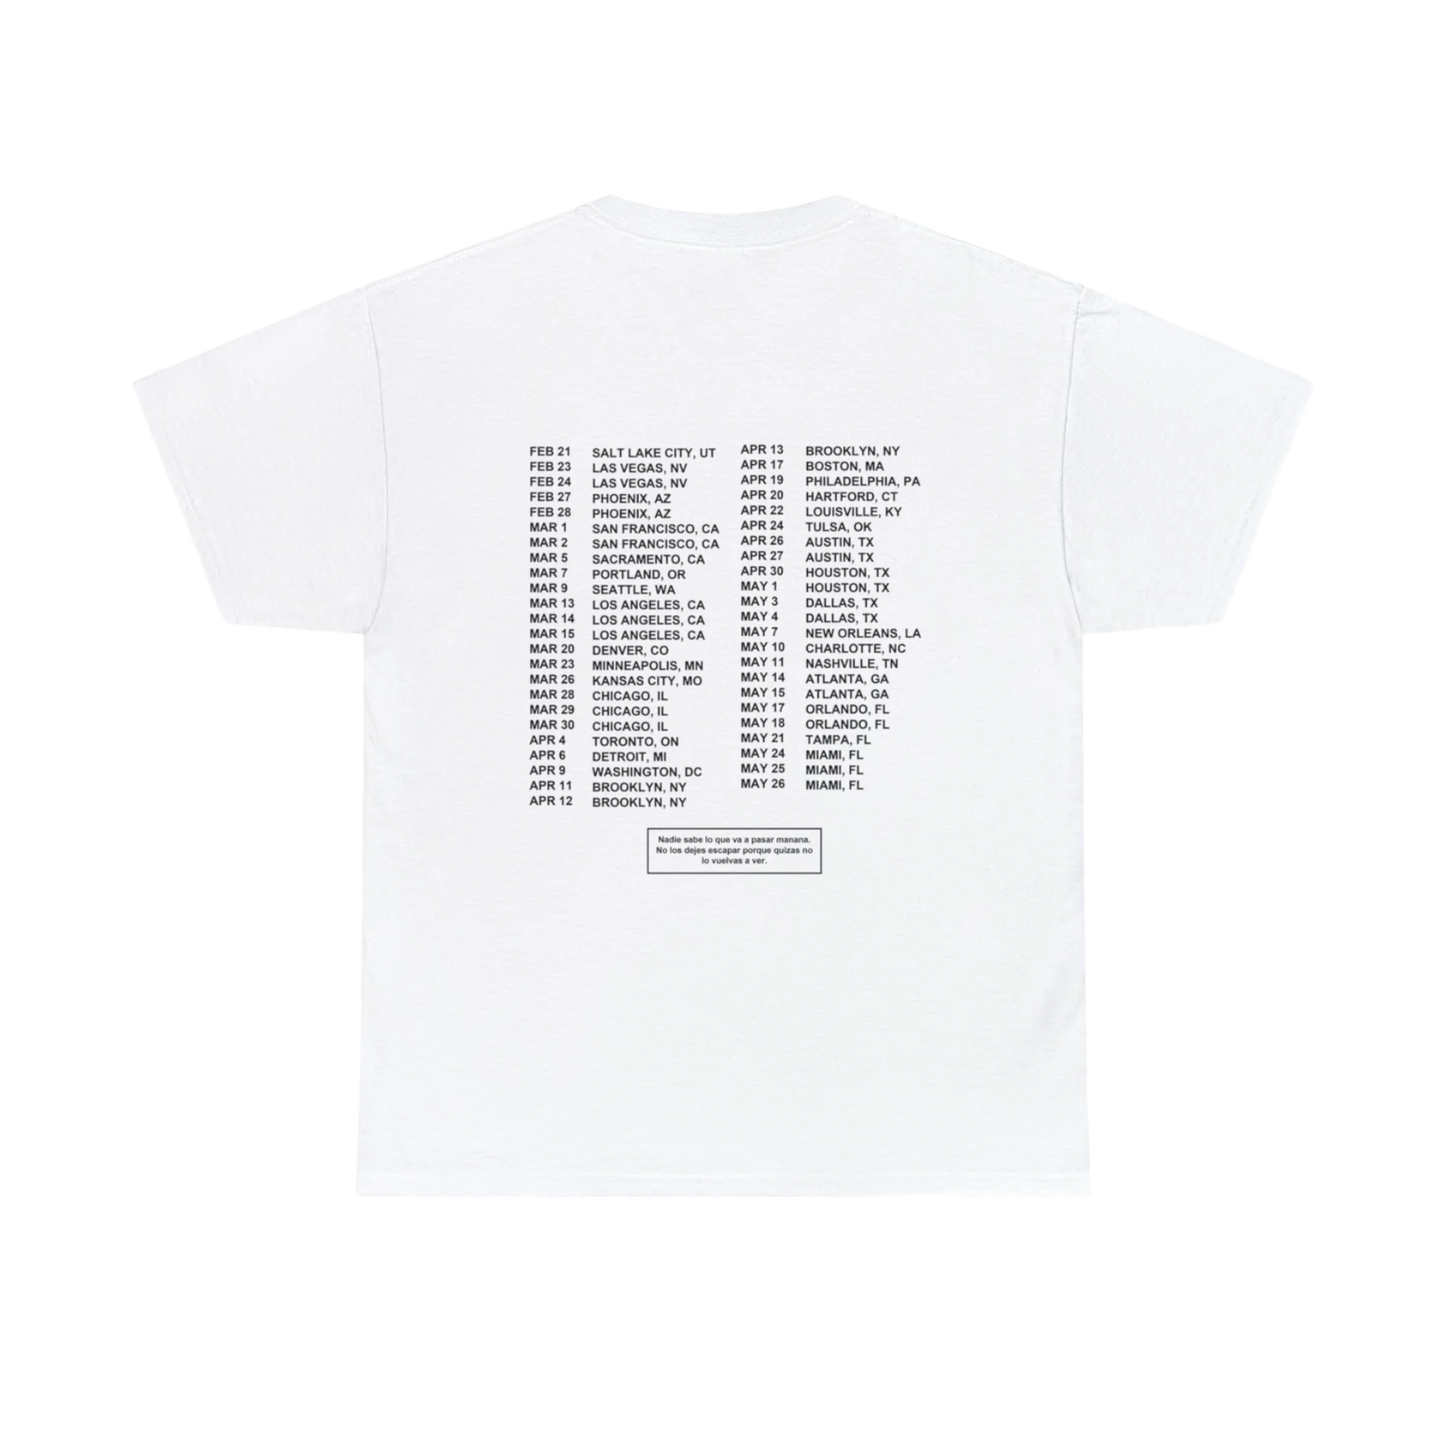 MOST WANTED TOUR - STOP SIGN TOUR DATES WHITE COTTON TEE